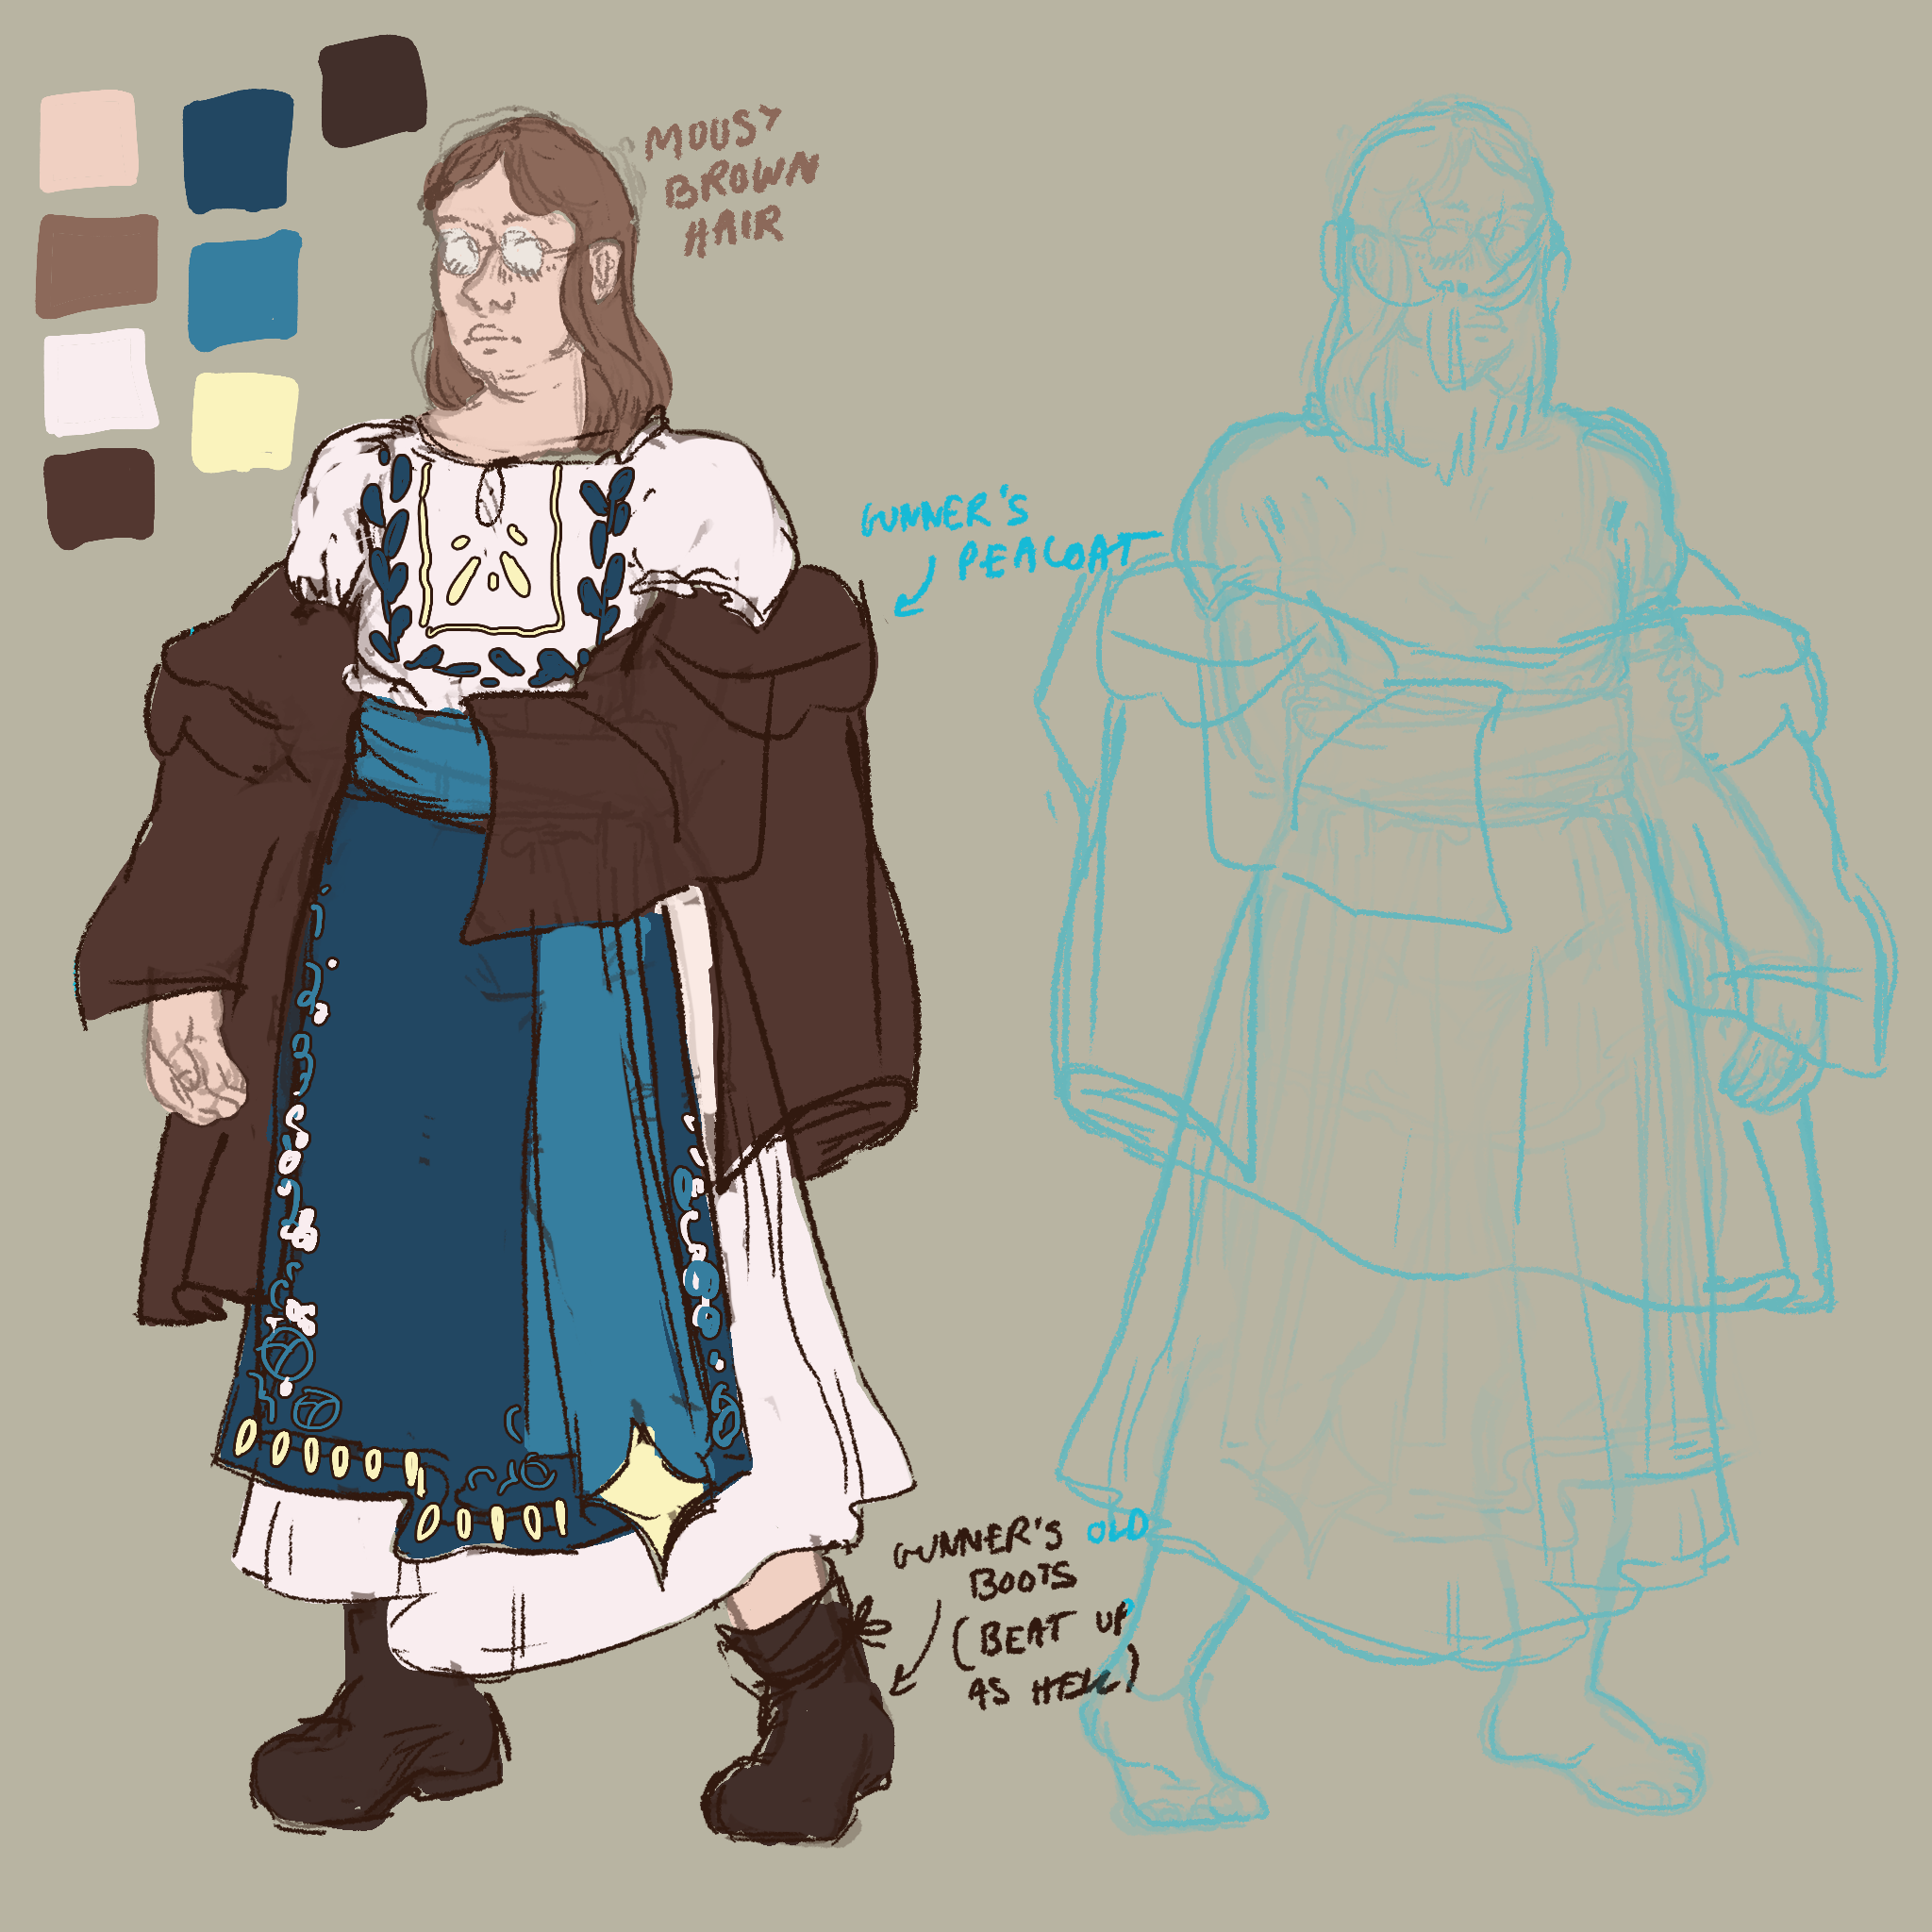 A coloured sketch of Euterpe, a young White woman with mousy brown hair and glasses, wearing Eastern European-inspired folk clothing in blue and white, with a large brown jacket over the top, with a non-coloured sketched view from the back next to it.